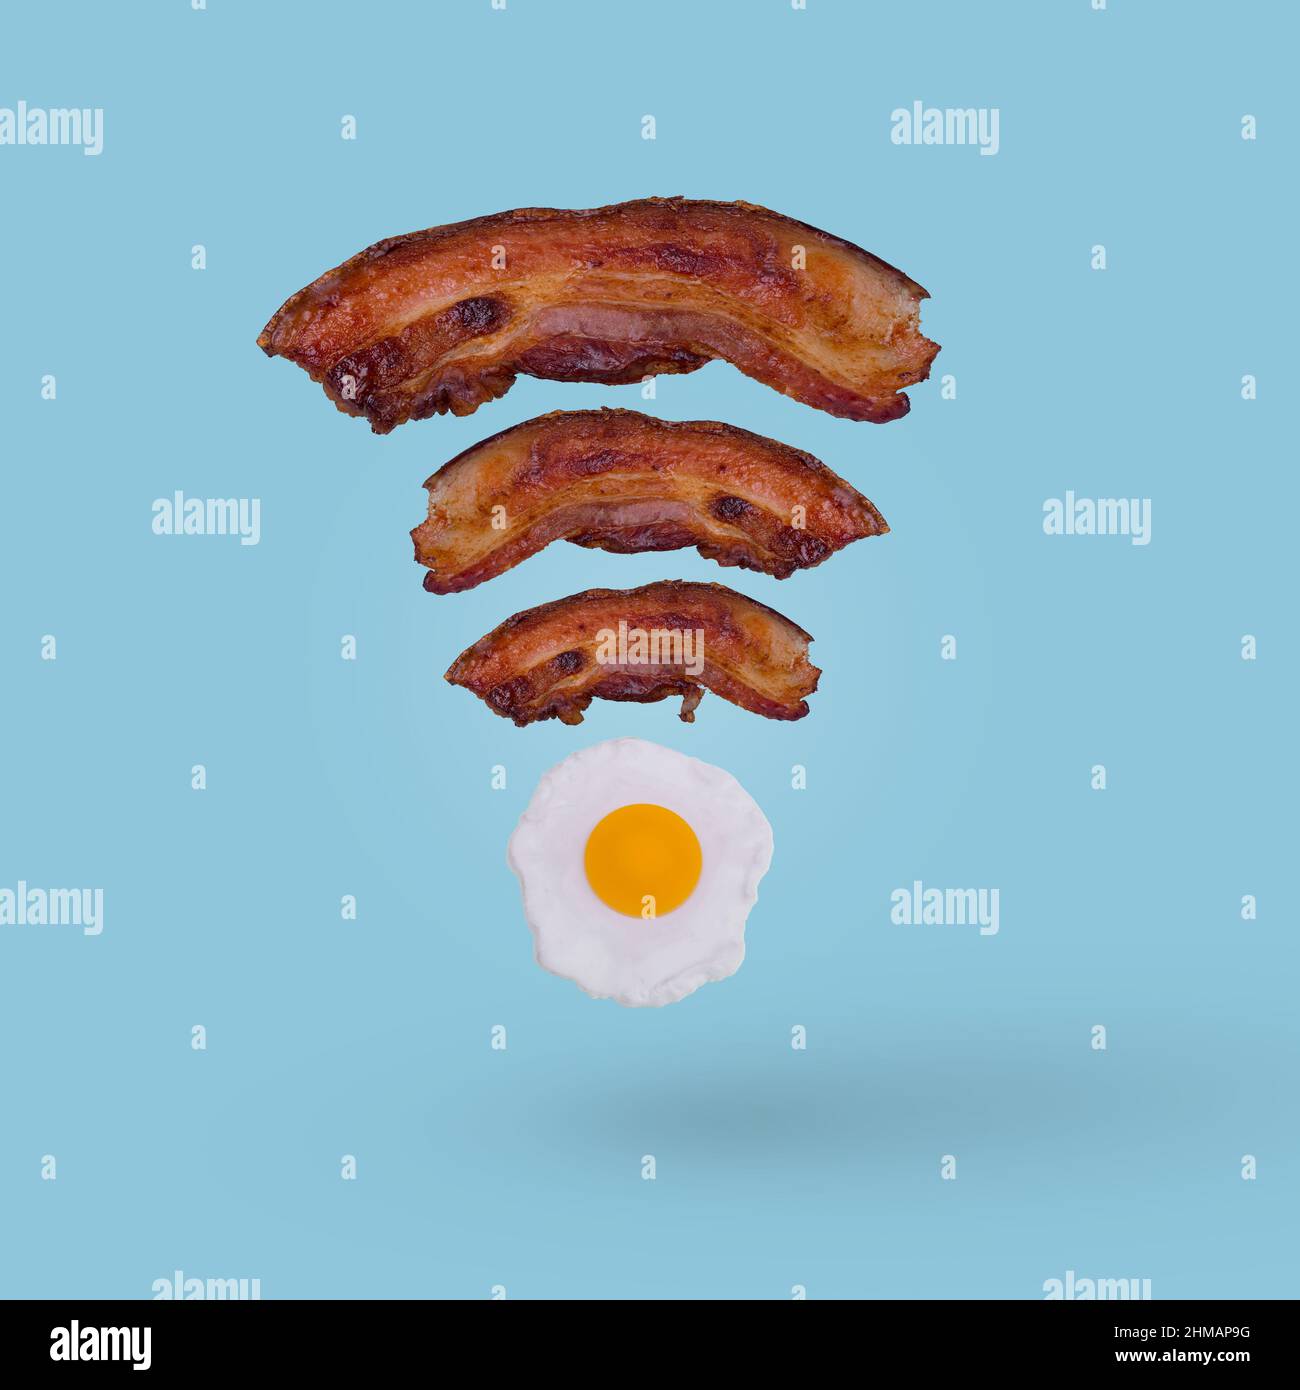 Wi fi symbol creative idea made of fried egg and slices of crispy bacon on blue color background. Minimal food idea and Internet technology /networkin Stock Photo